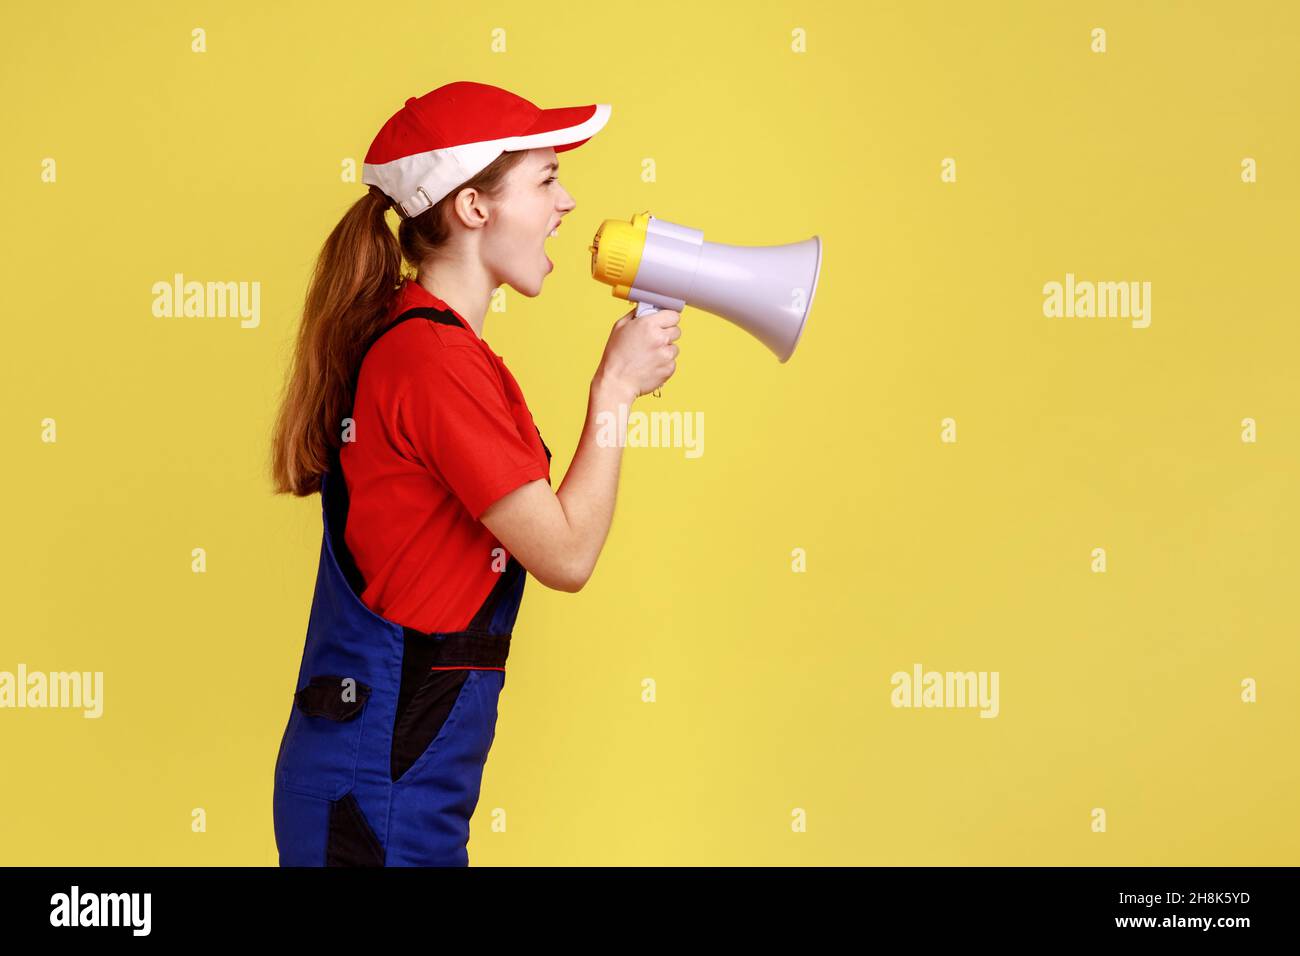 Side view portrait of angry worker woman screaming loud in megaphone, giving command her subordinate builders, wearing work uniform and red cap. Indoor studio shot isolated on yellow background. Stock Photo